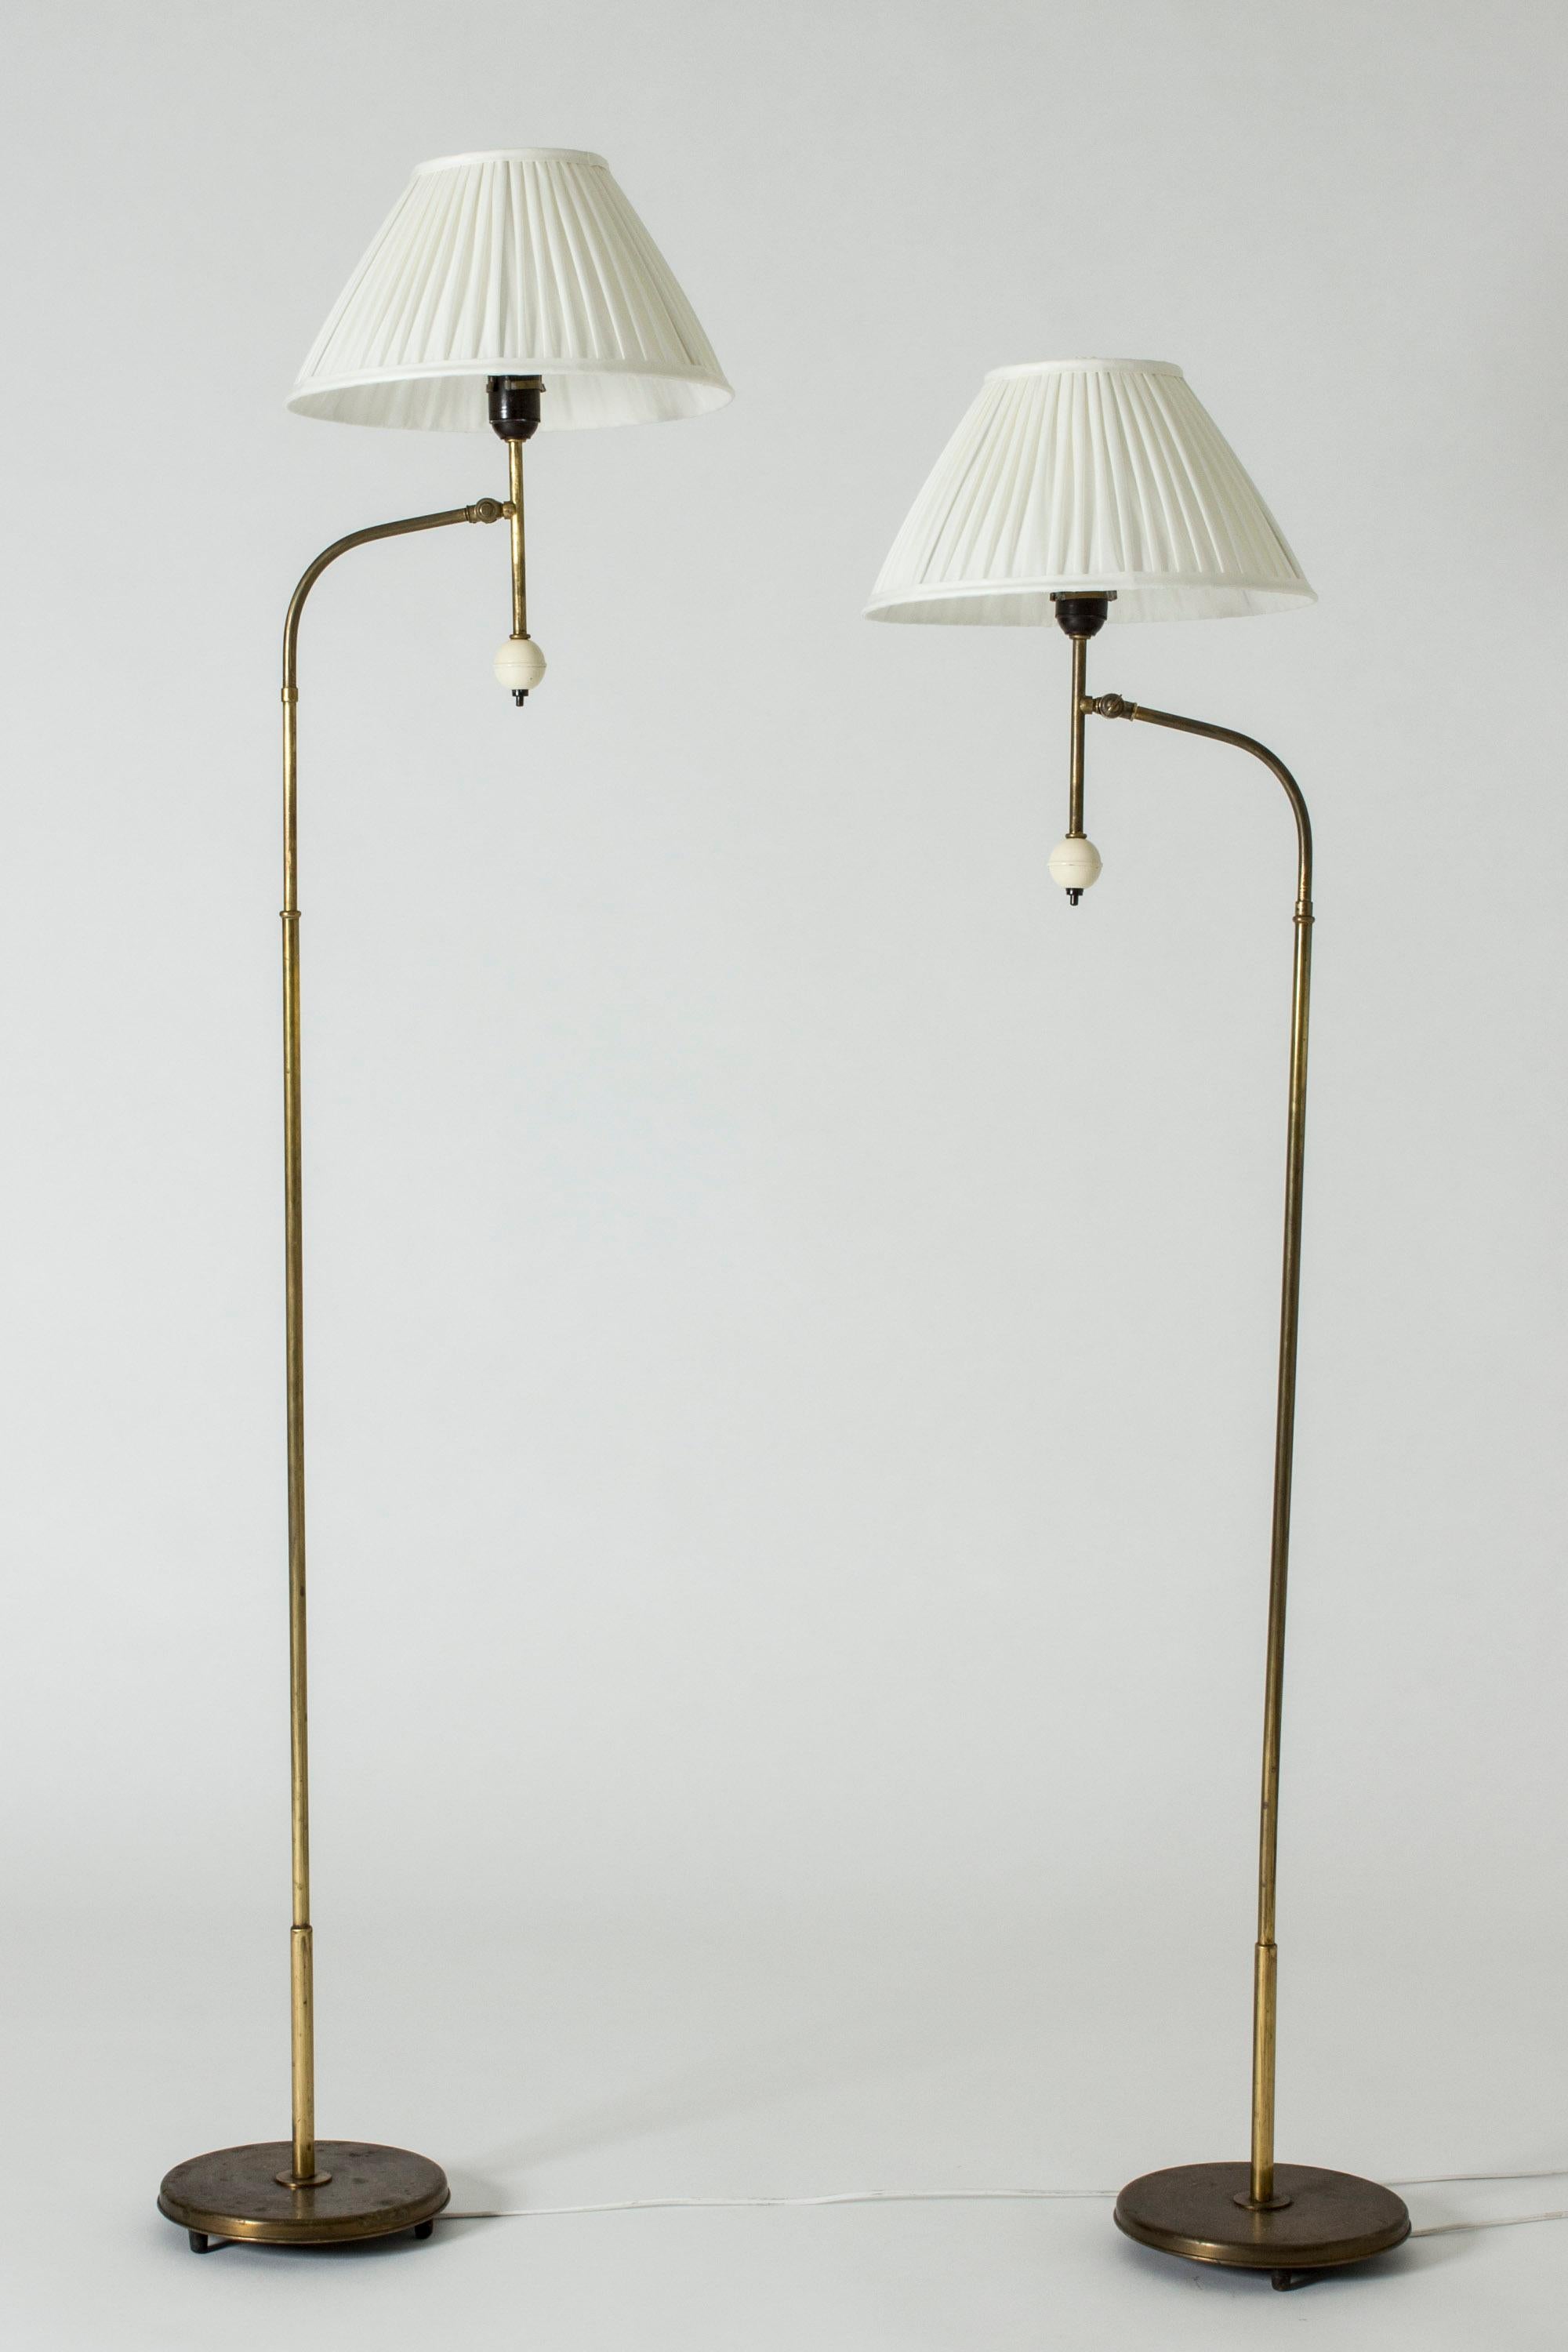 Pair of cool floor lamps by Bertil Brisborg, made from brass. Decorative and fun ball-shaped light switches. Adjustable heights, the possibility of adjusting the angle of the shades.

Size: Height 134-172 cm, width 47 cm, depth 32 cm.